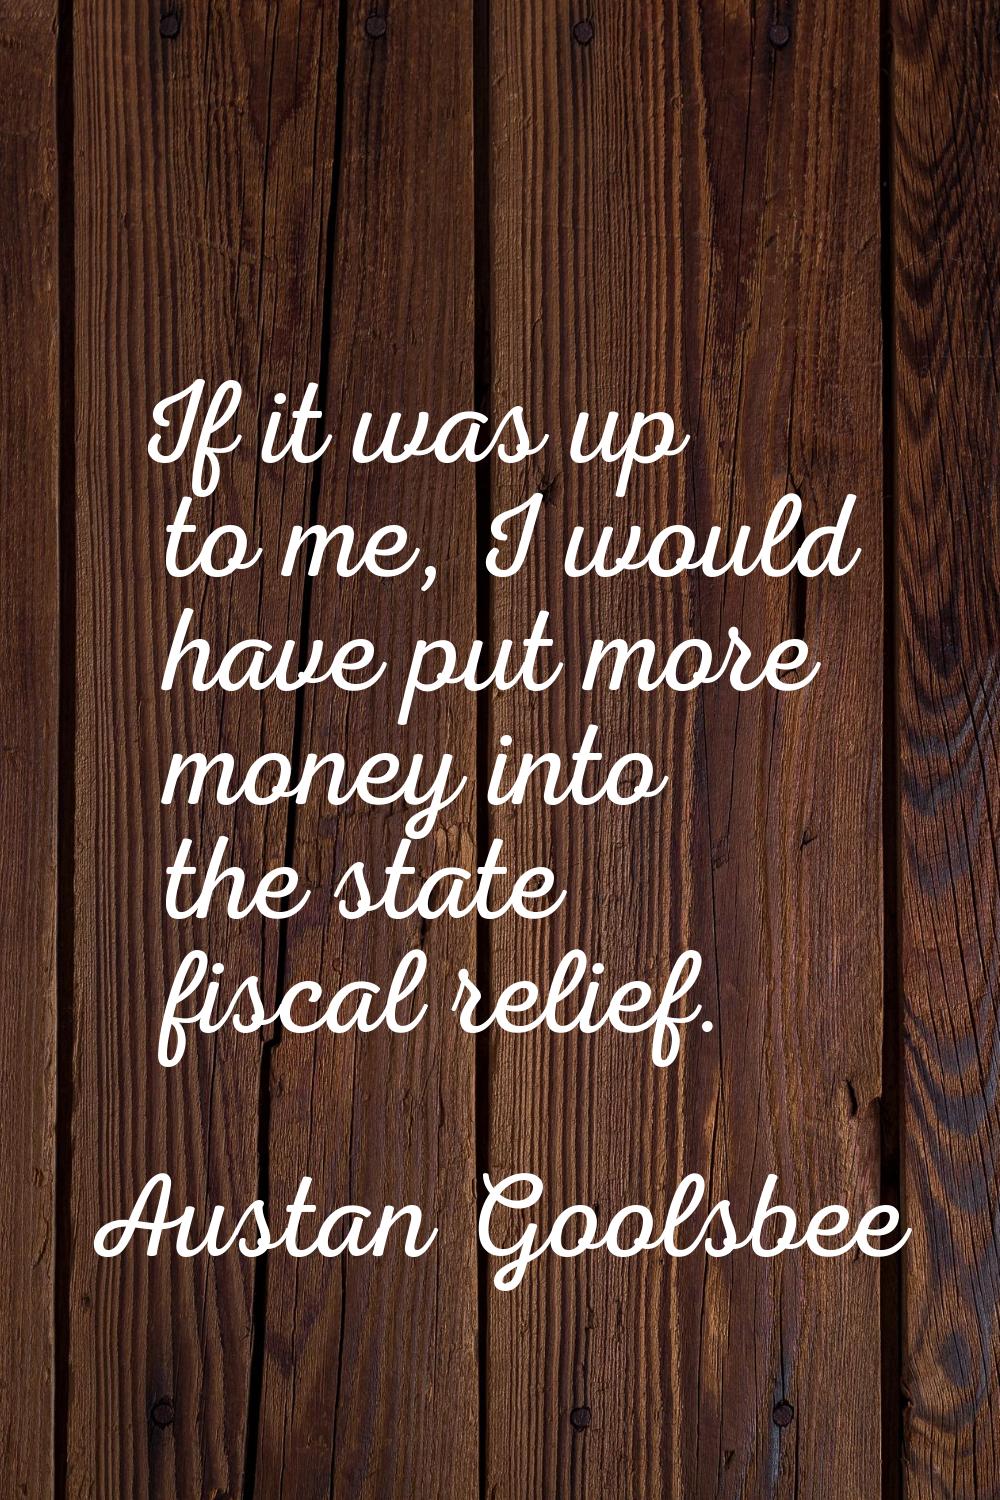 If it was up to me, I would have put more money into the state fiscal relief.